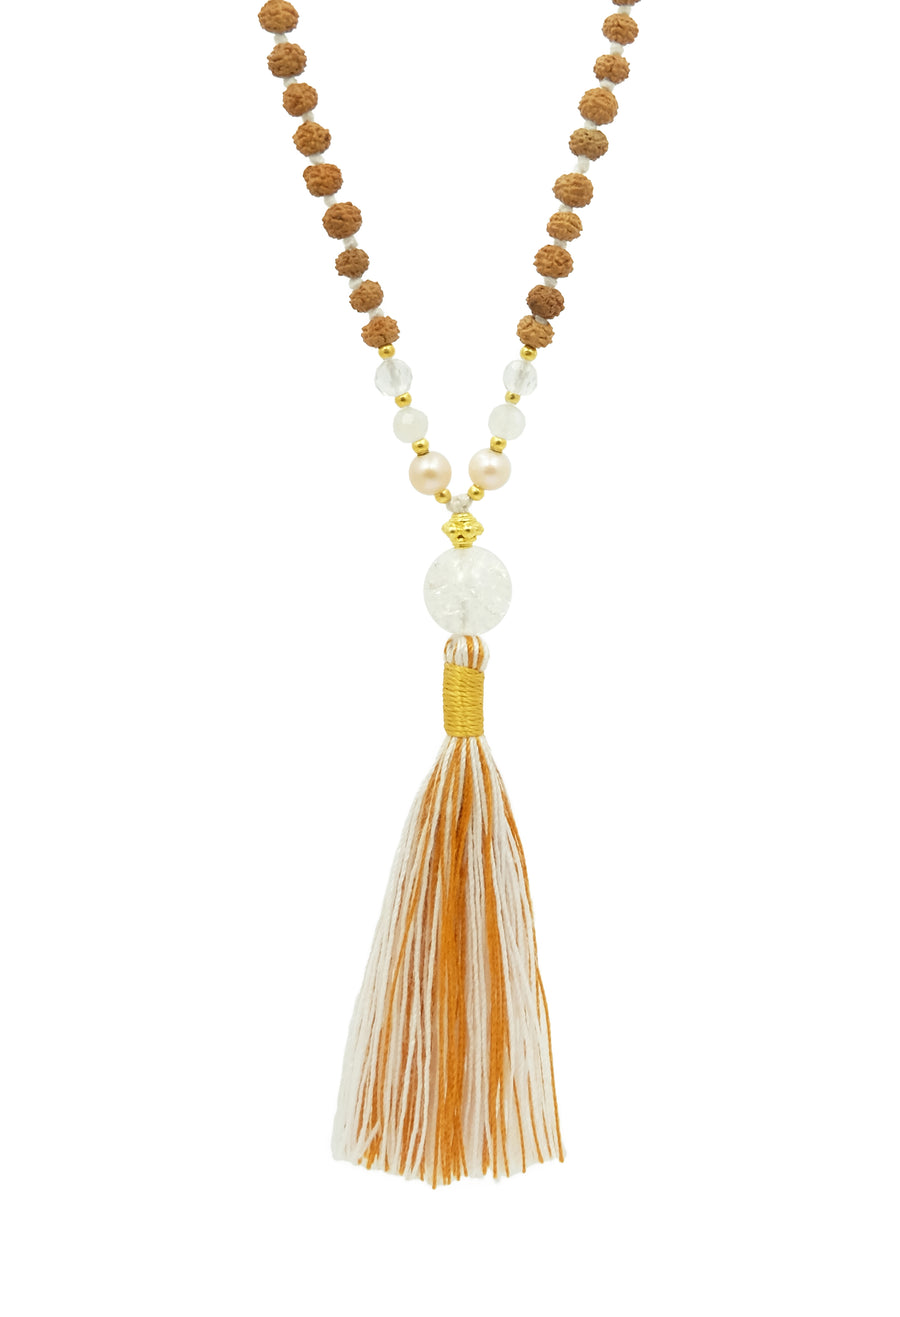 The Crystal Clarity mala features a divine trio of quartz, pearls, and rudraksha, can heighten insights of intuition and open a clear channel with your higher-self.